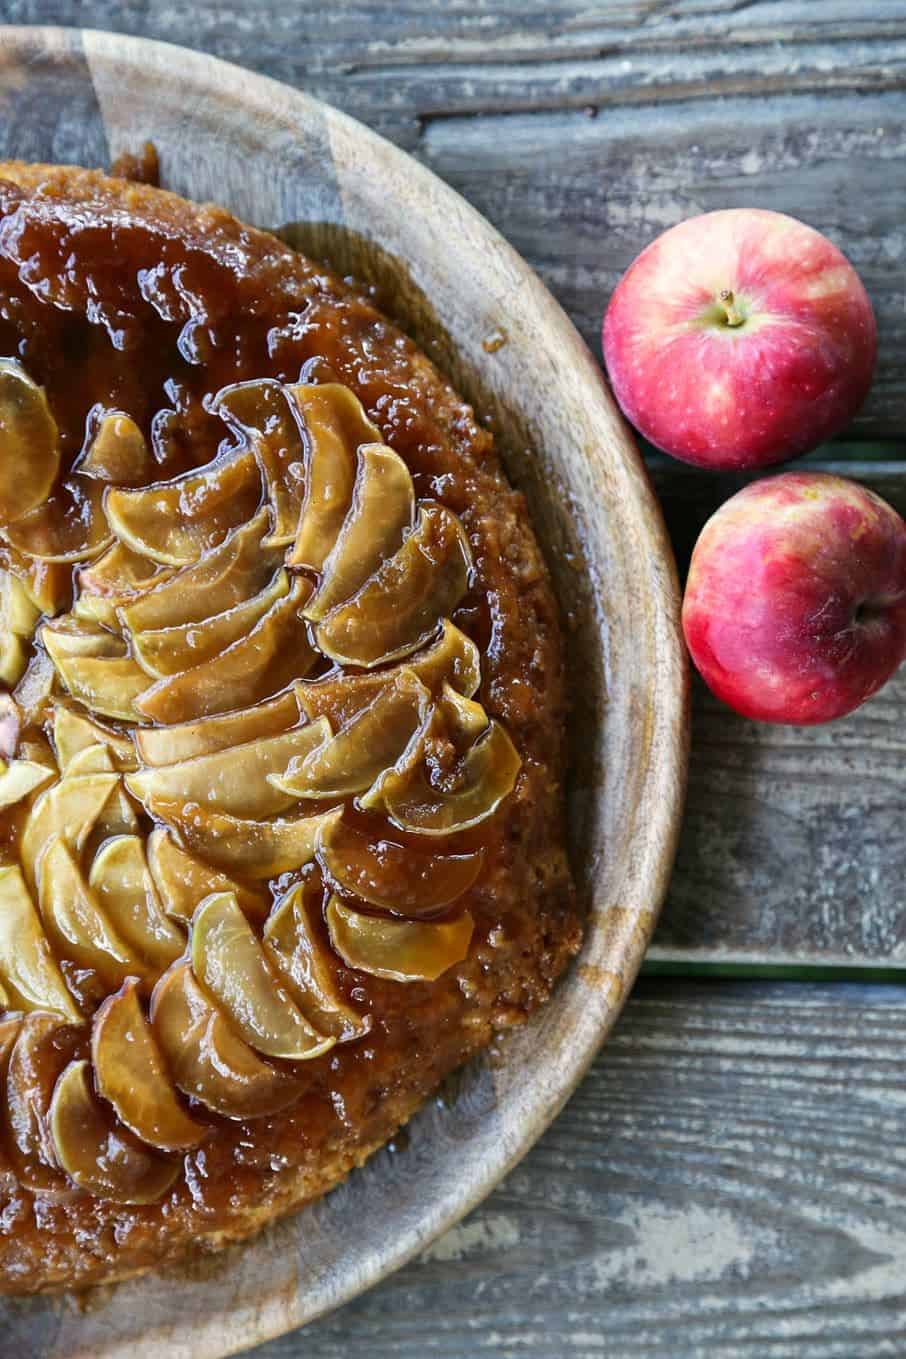 https://www.foodiewithfamily.com/wp-content/uploads/2015/08/Maple-Apple-Upside-Down-Skillet-Cake.jpg